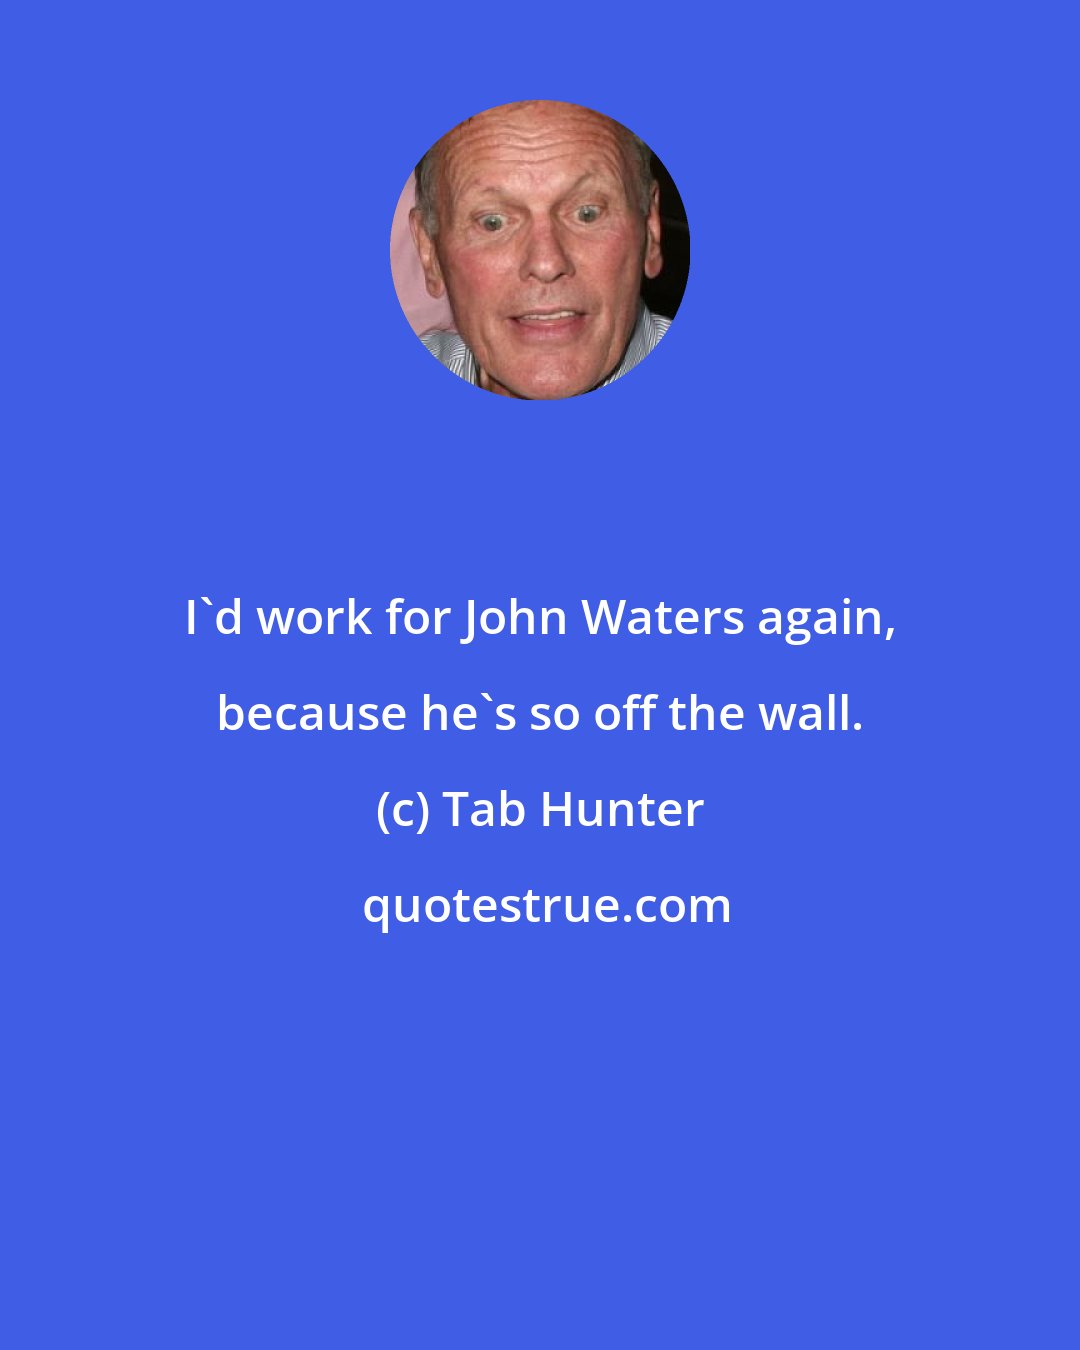 Tab Hunter: I'd work for John Waters again, because he's so off the wall.